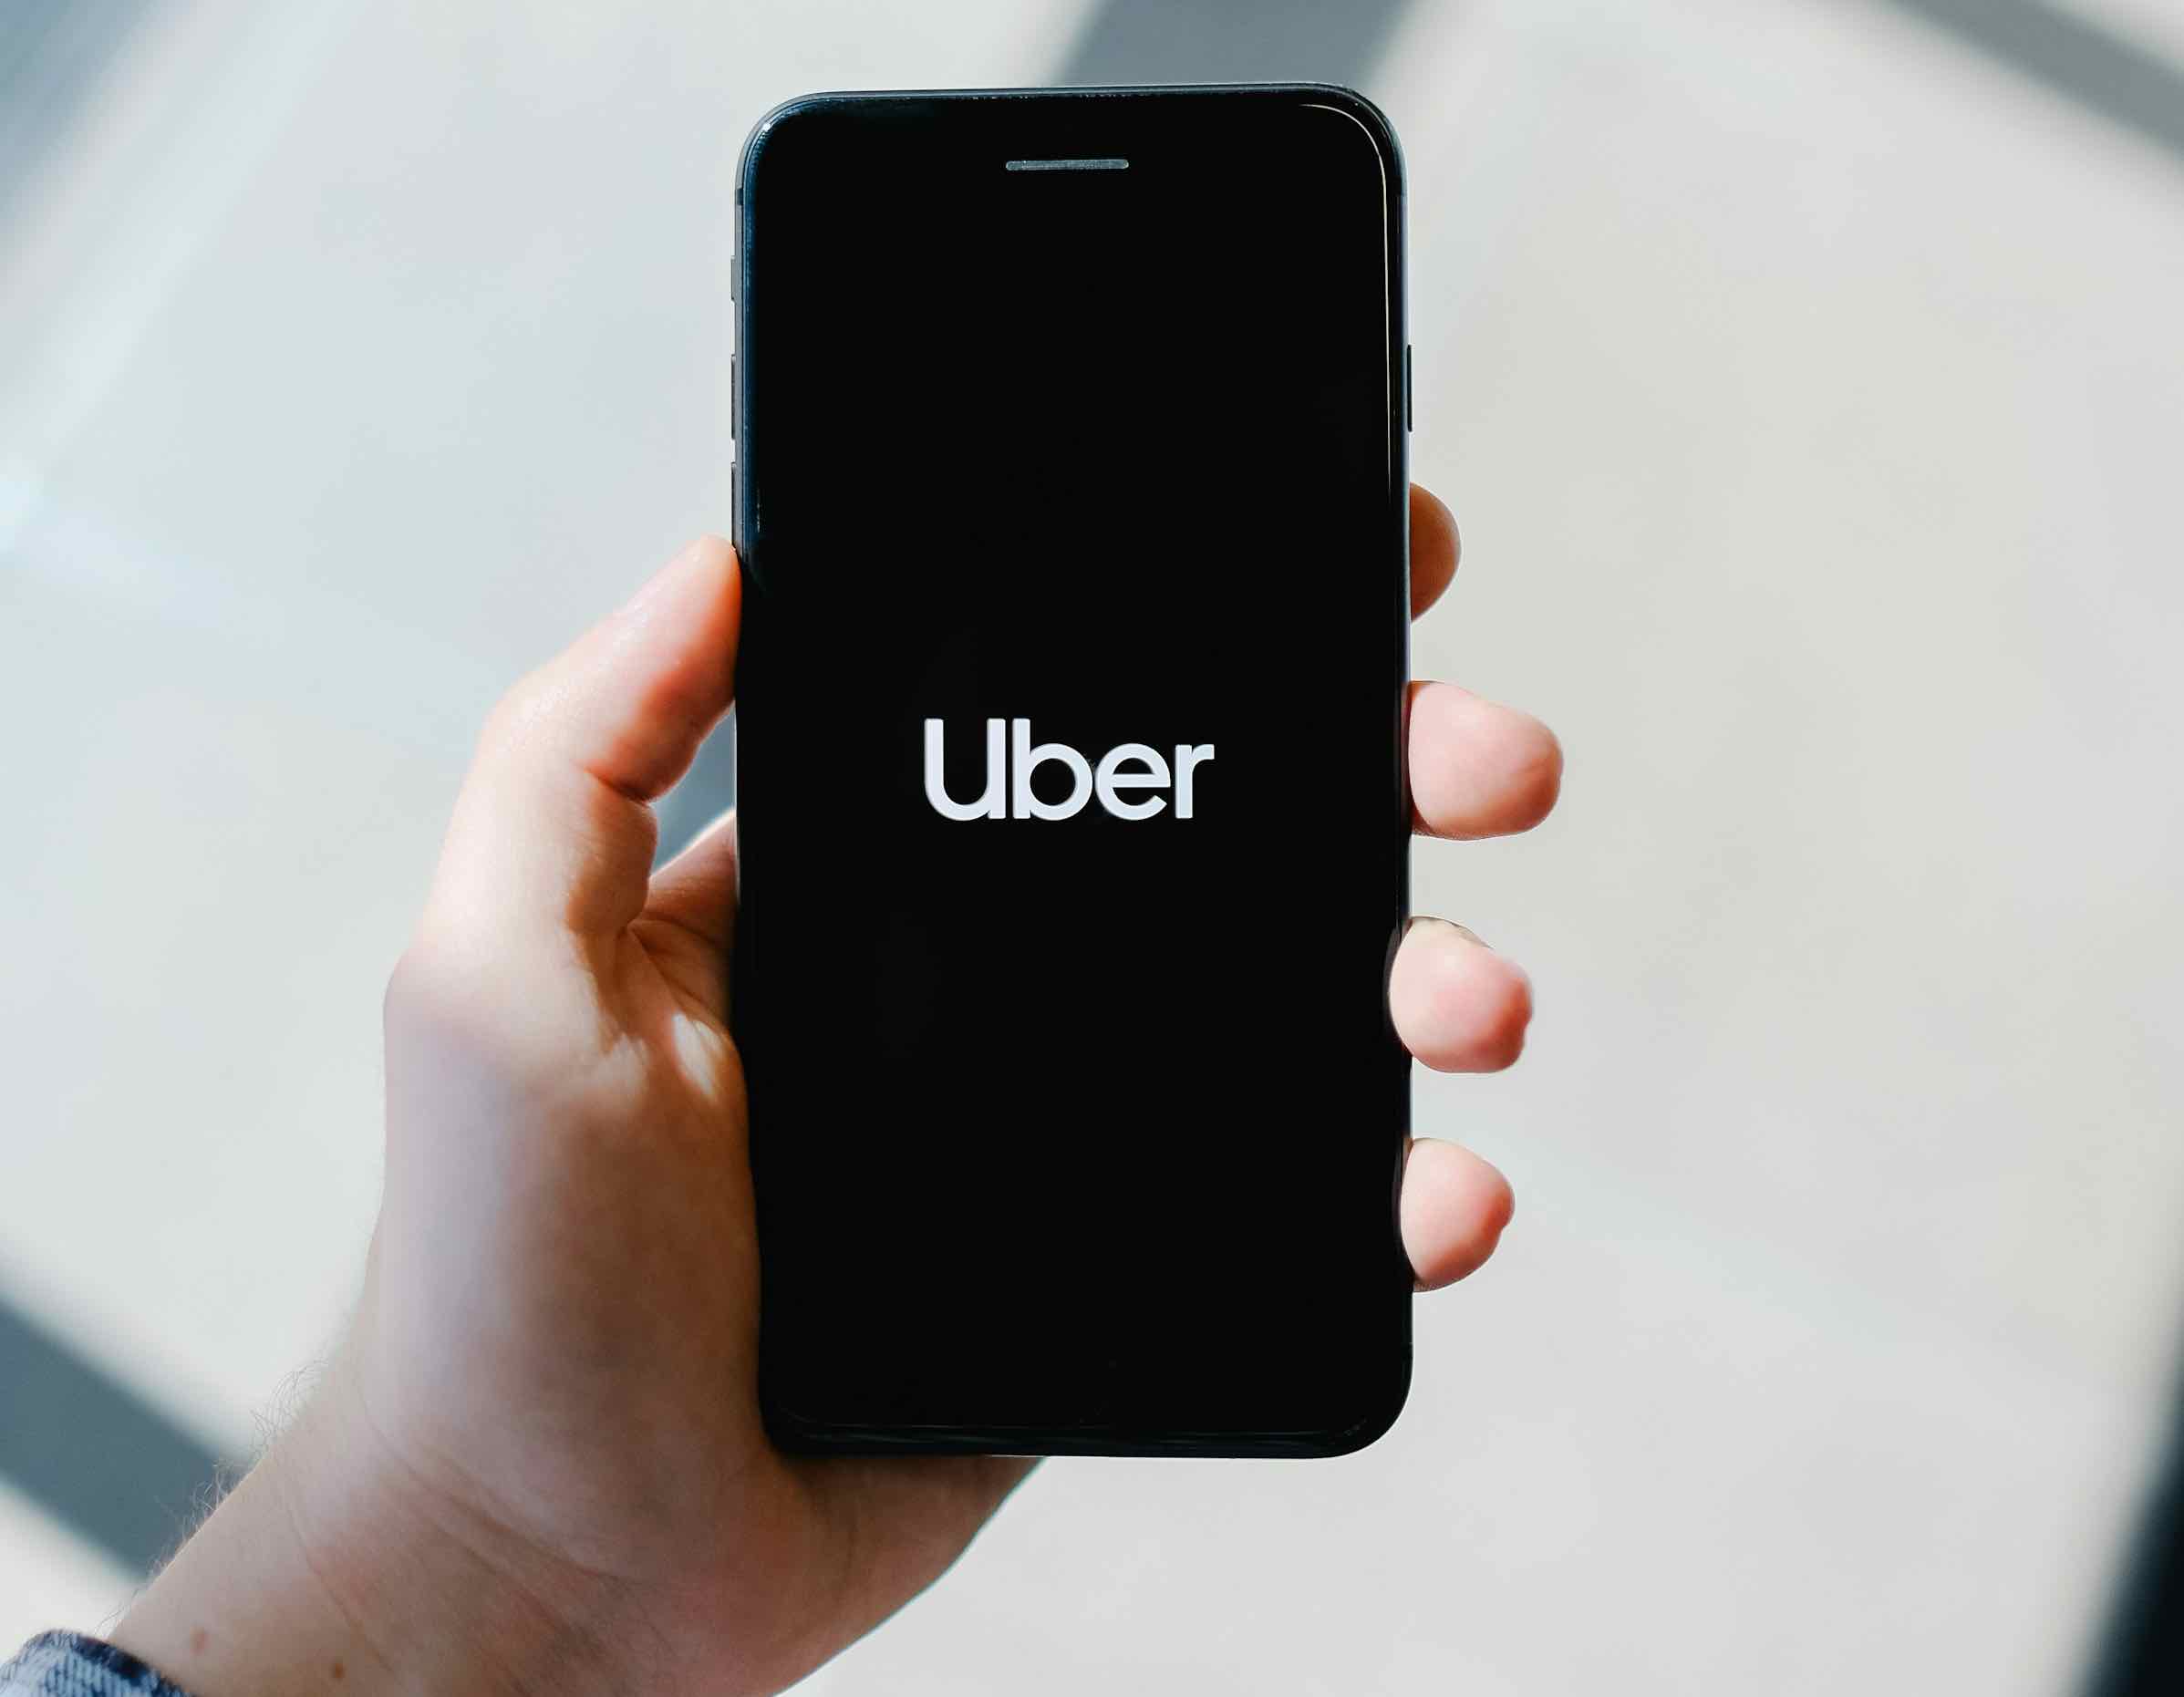 Uber’s Surprise Loss Triggers 9% Drop in Share Price